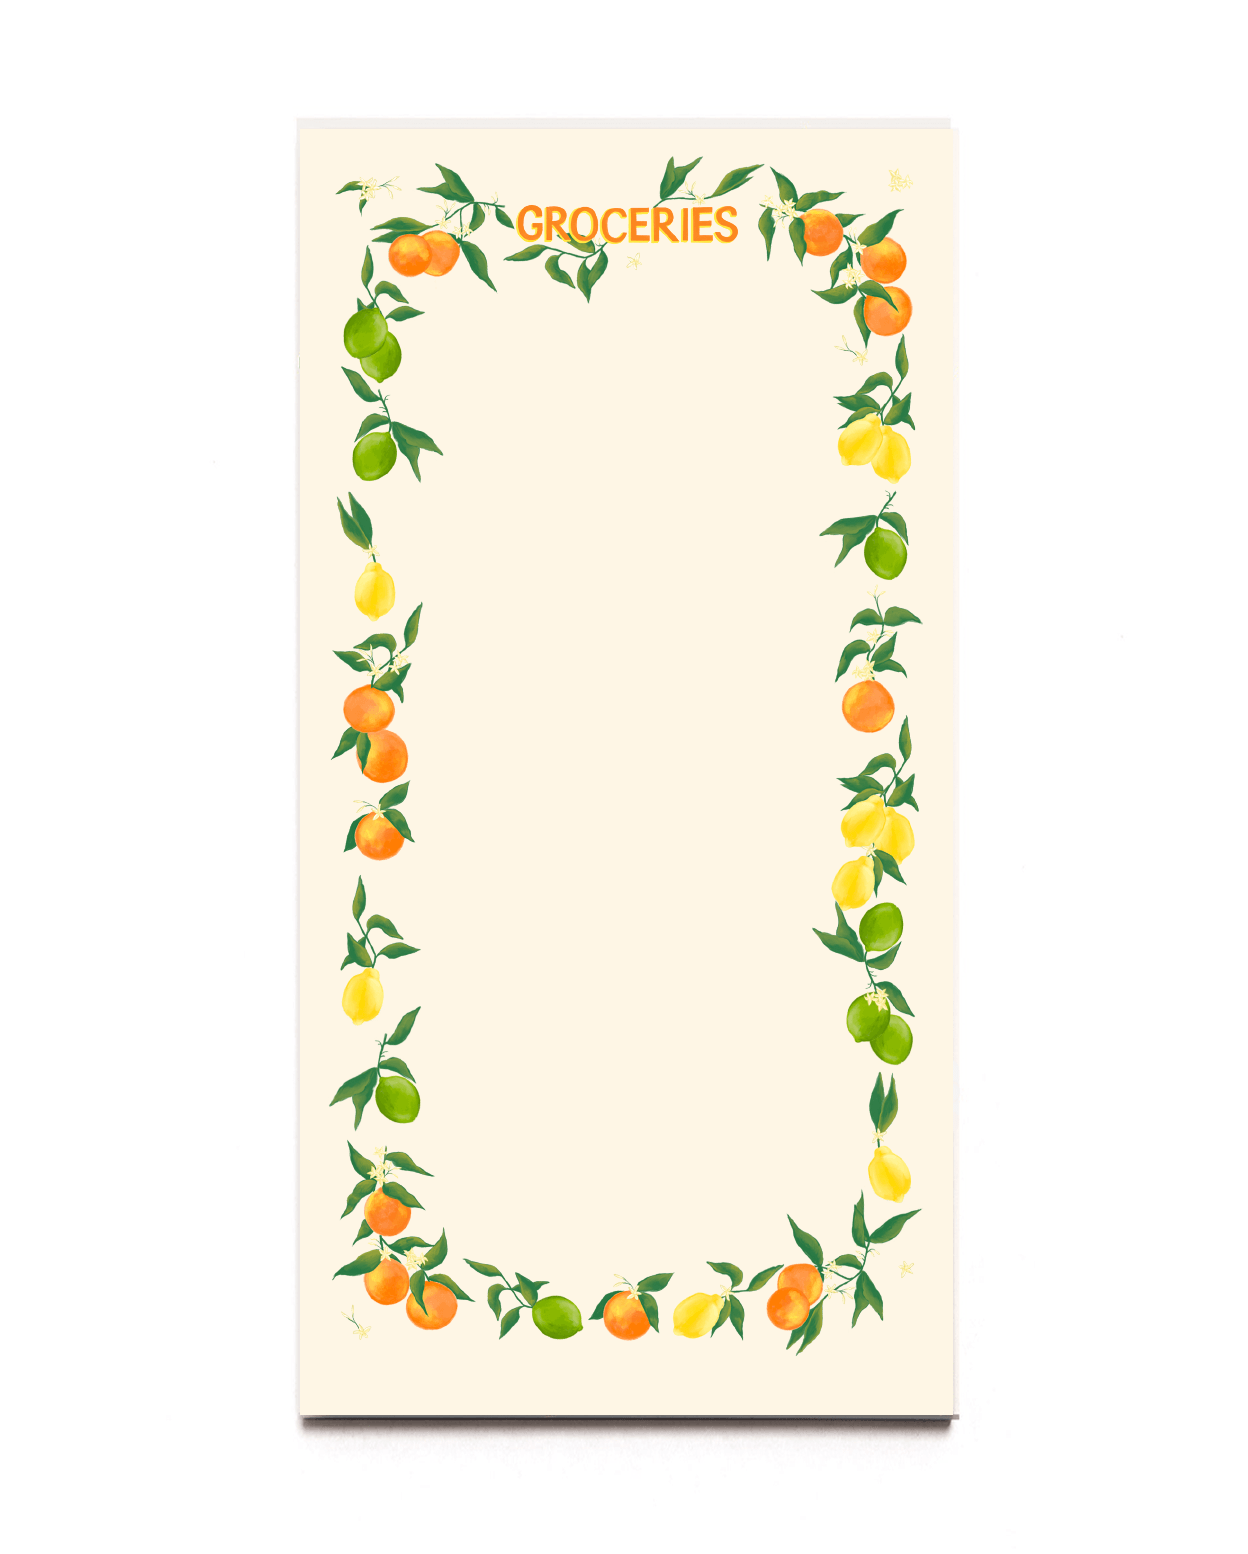 Citrus fruits line each side of the notepad. Printed on cream colored paper.